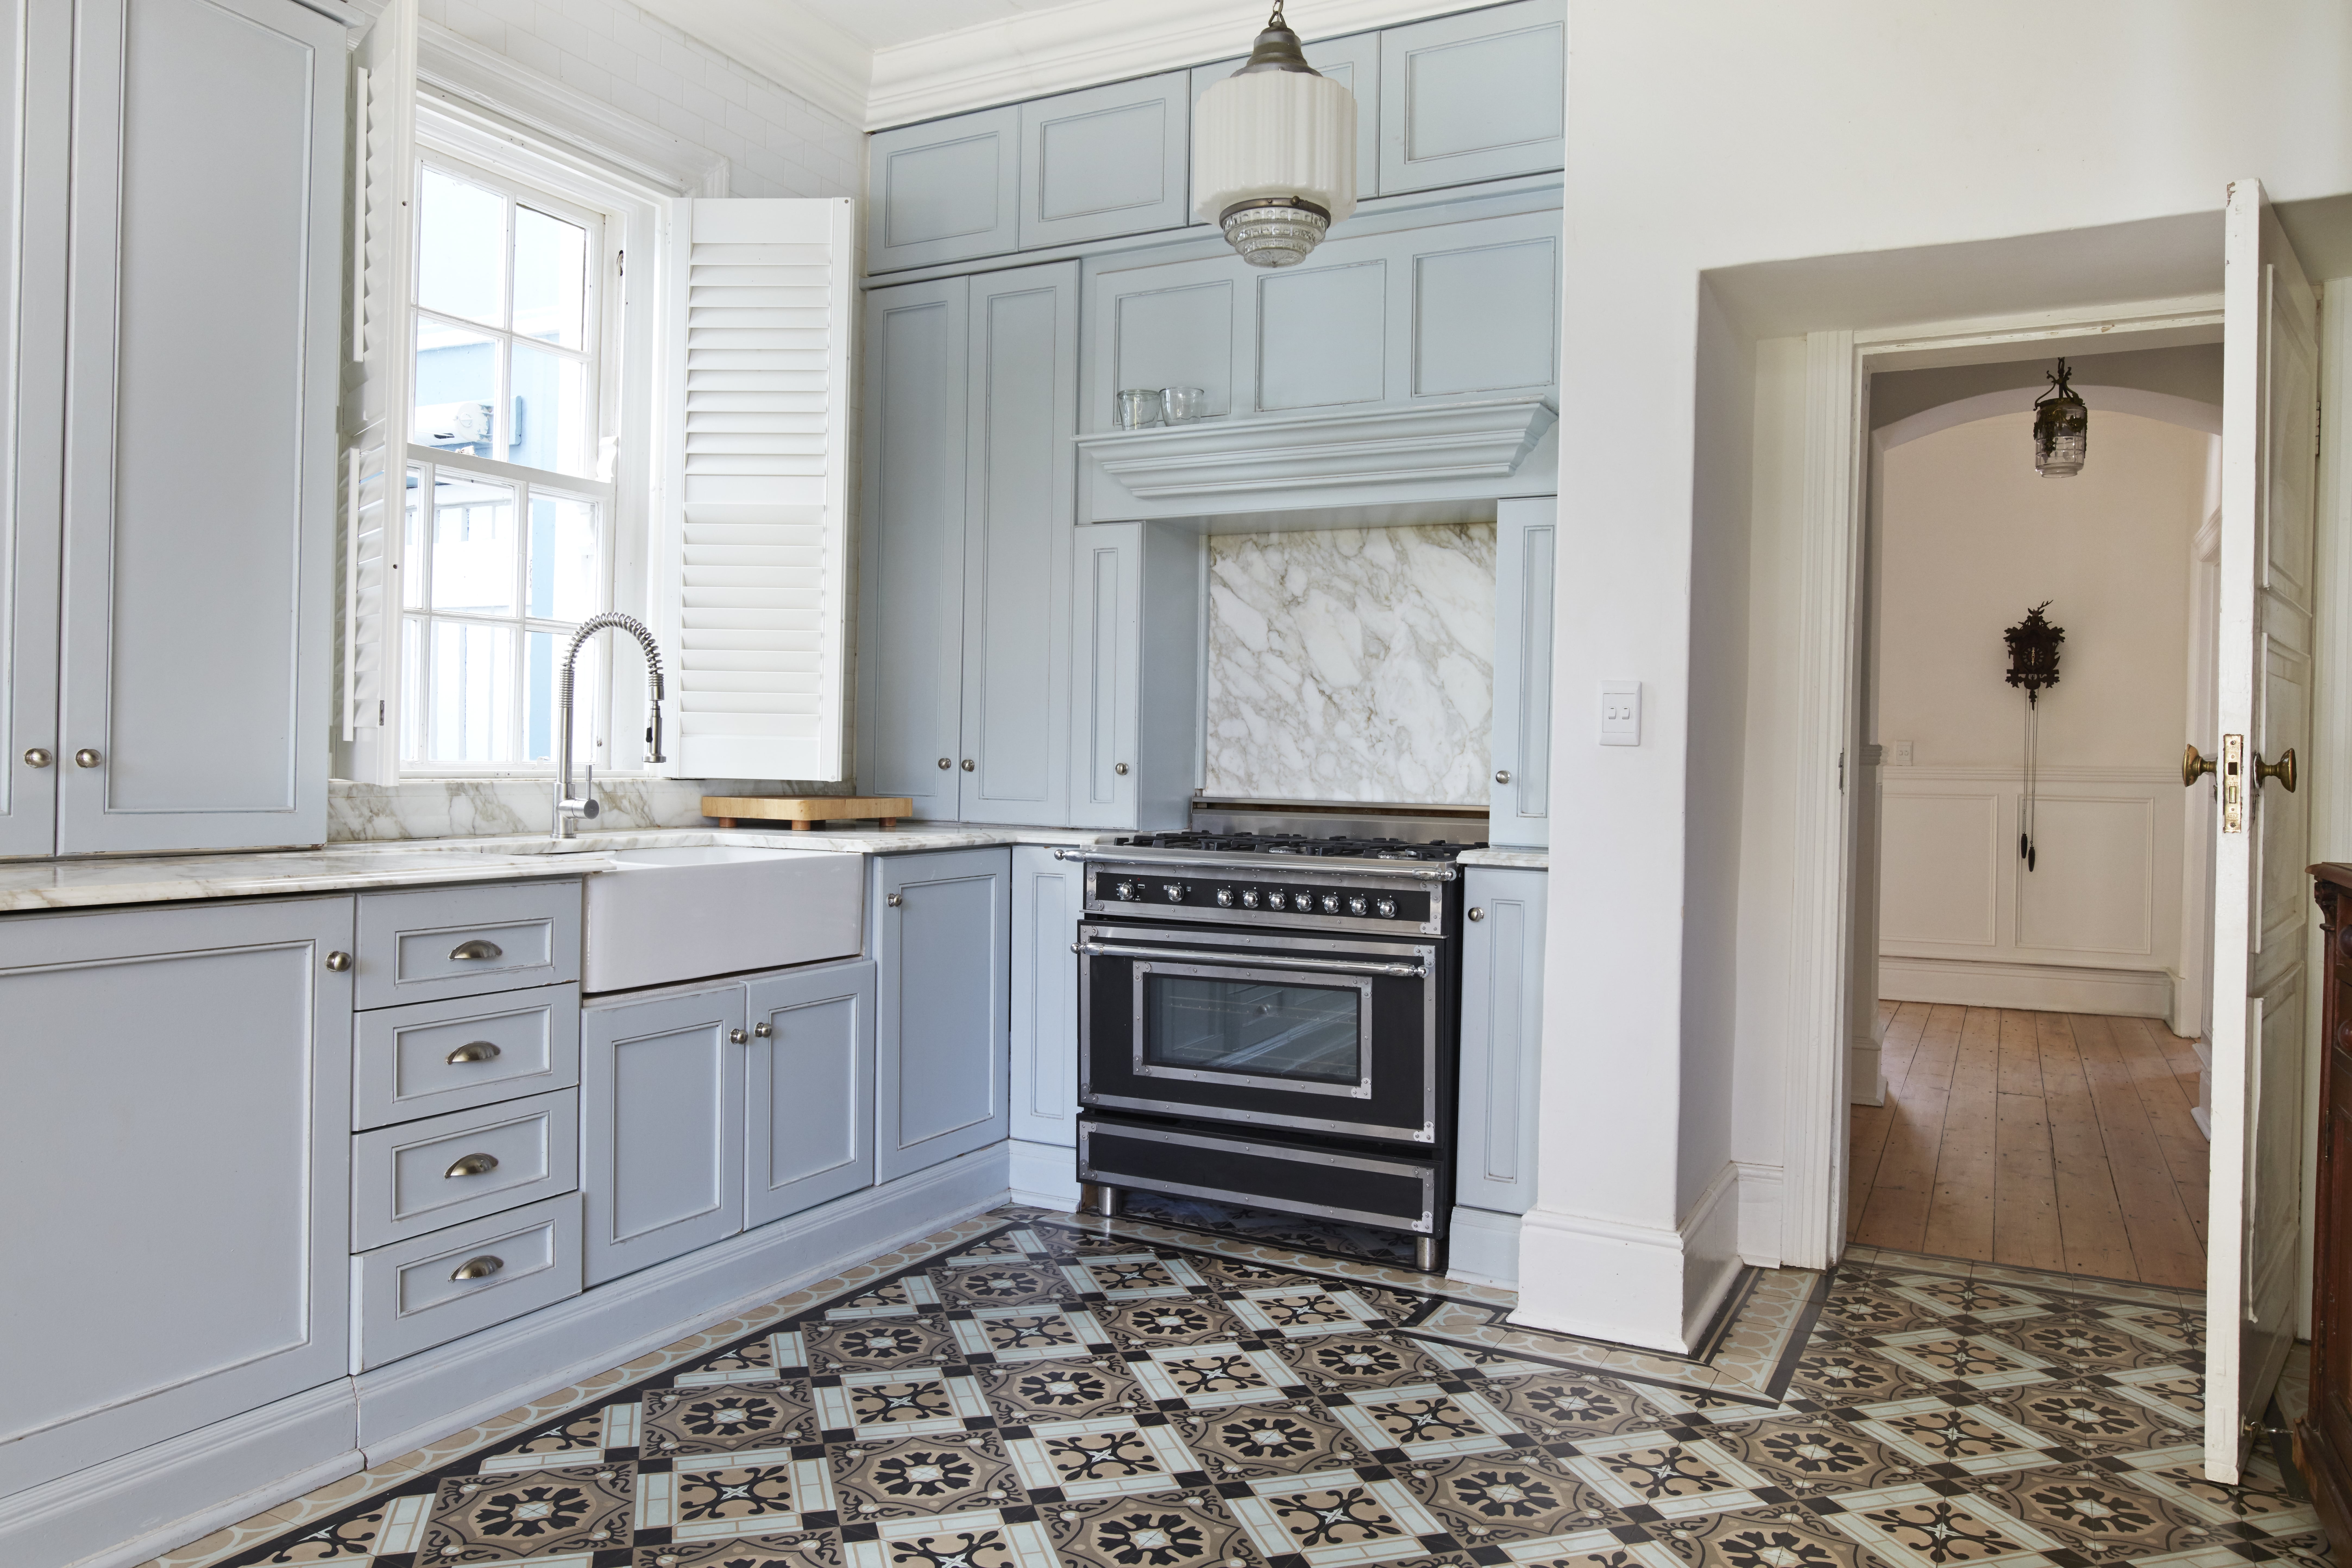 How to Update your Rental Kitchen (and get your deposit back) - at